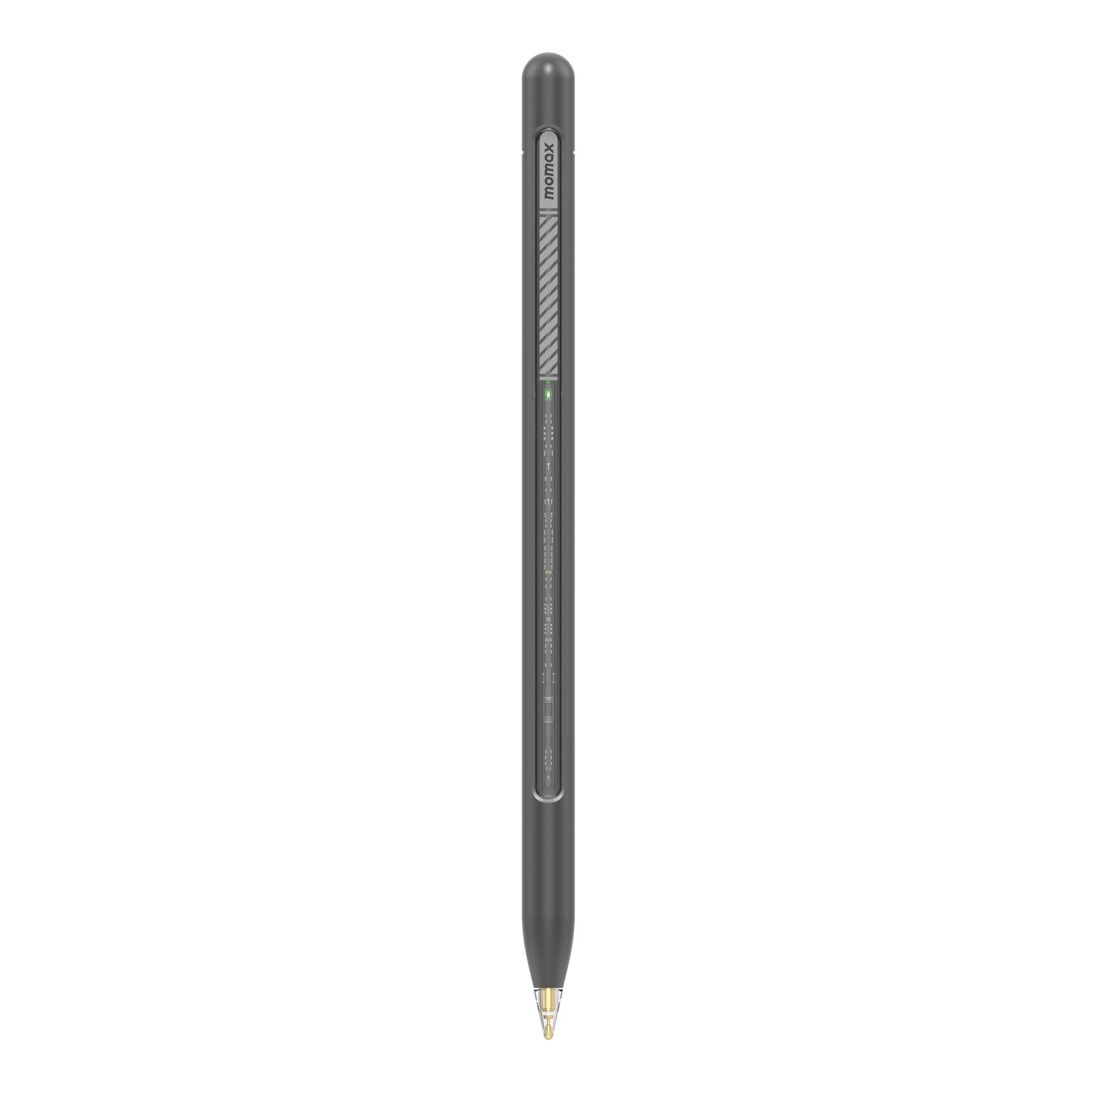 Momax Mag.Link Pro Magnetic Charging Active Stylus Pen - Space Grey